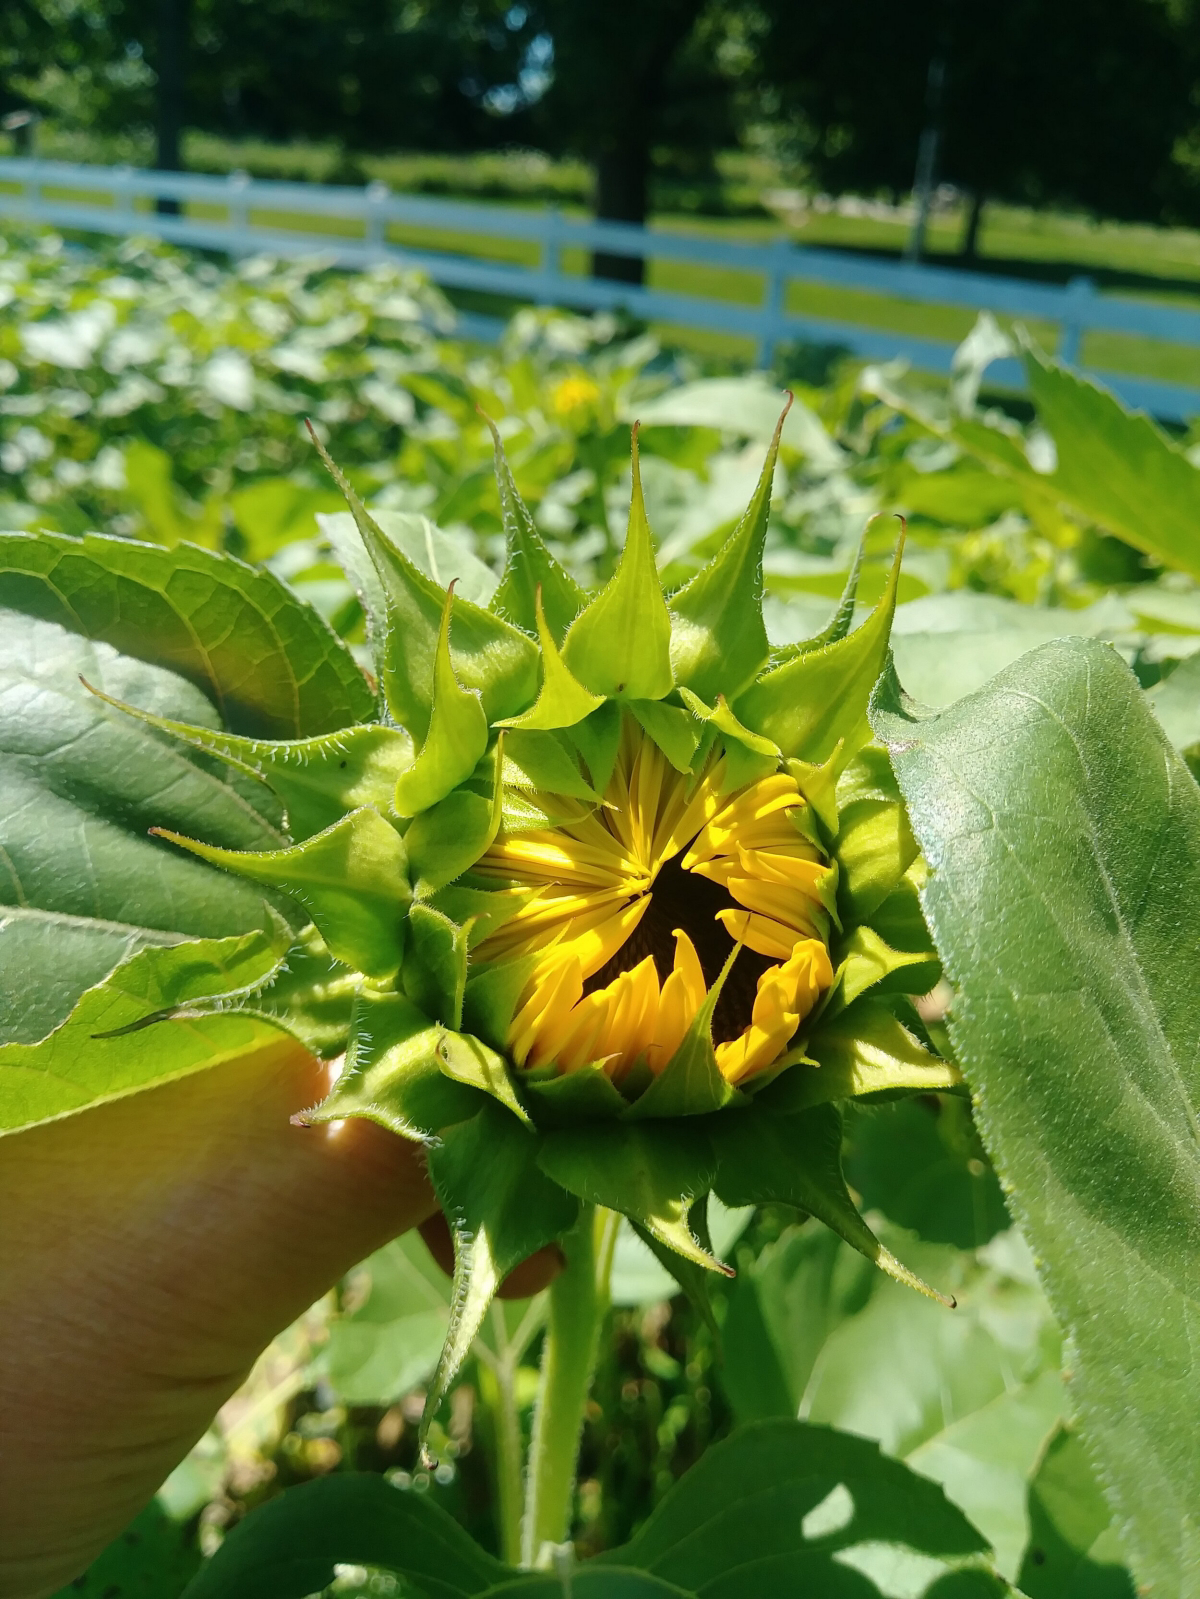 how to know when sunflowers are ready to harvest